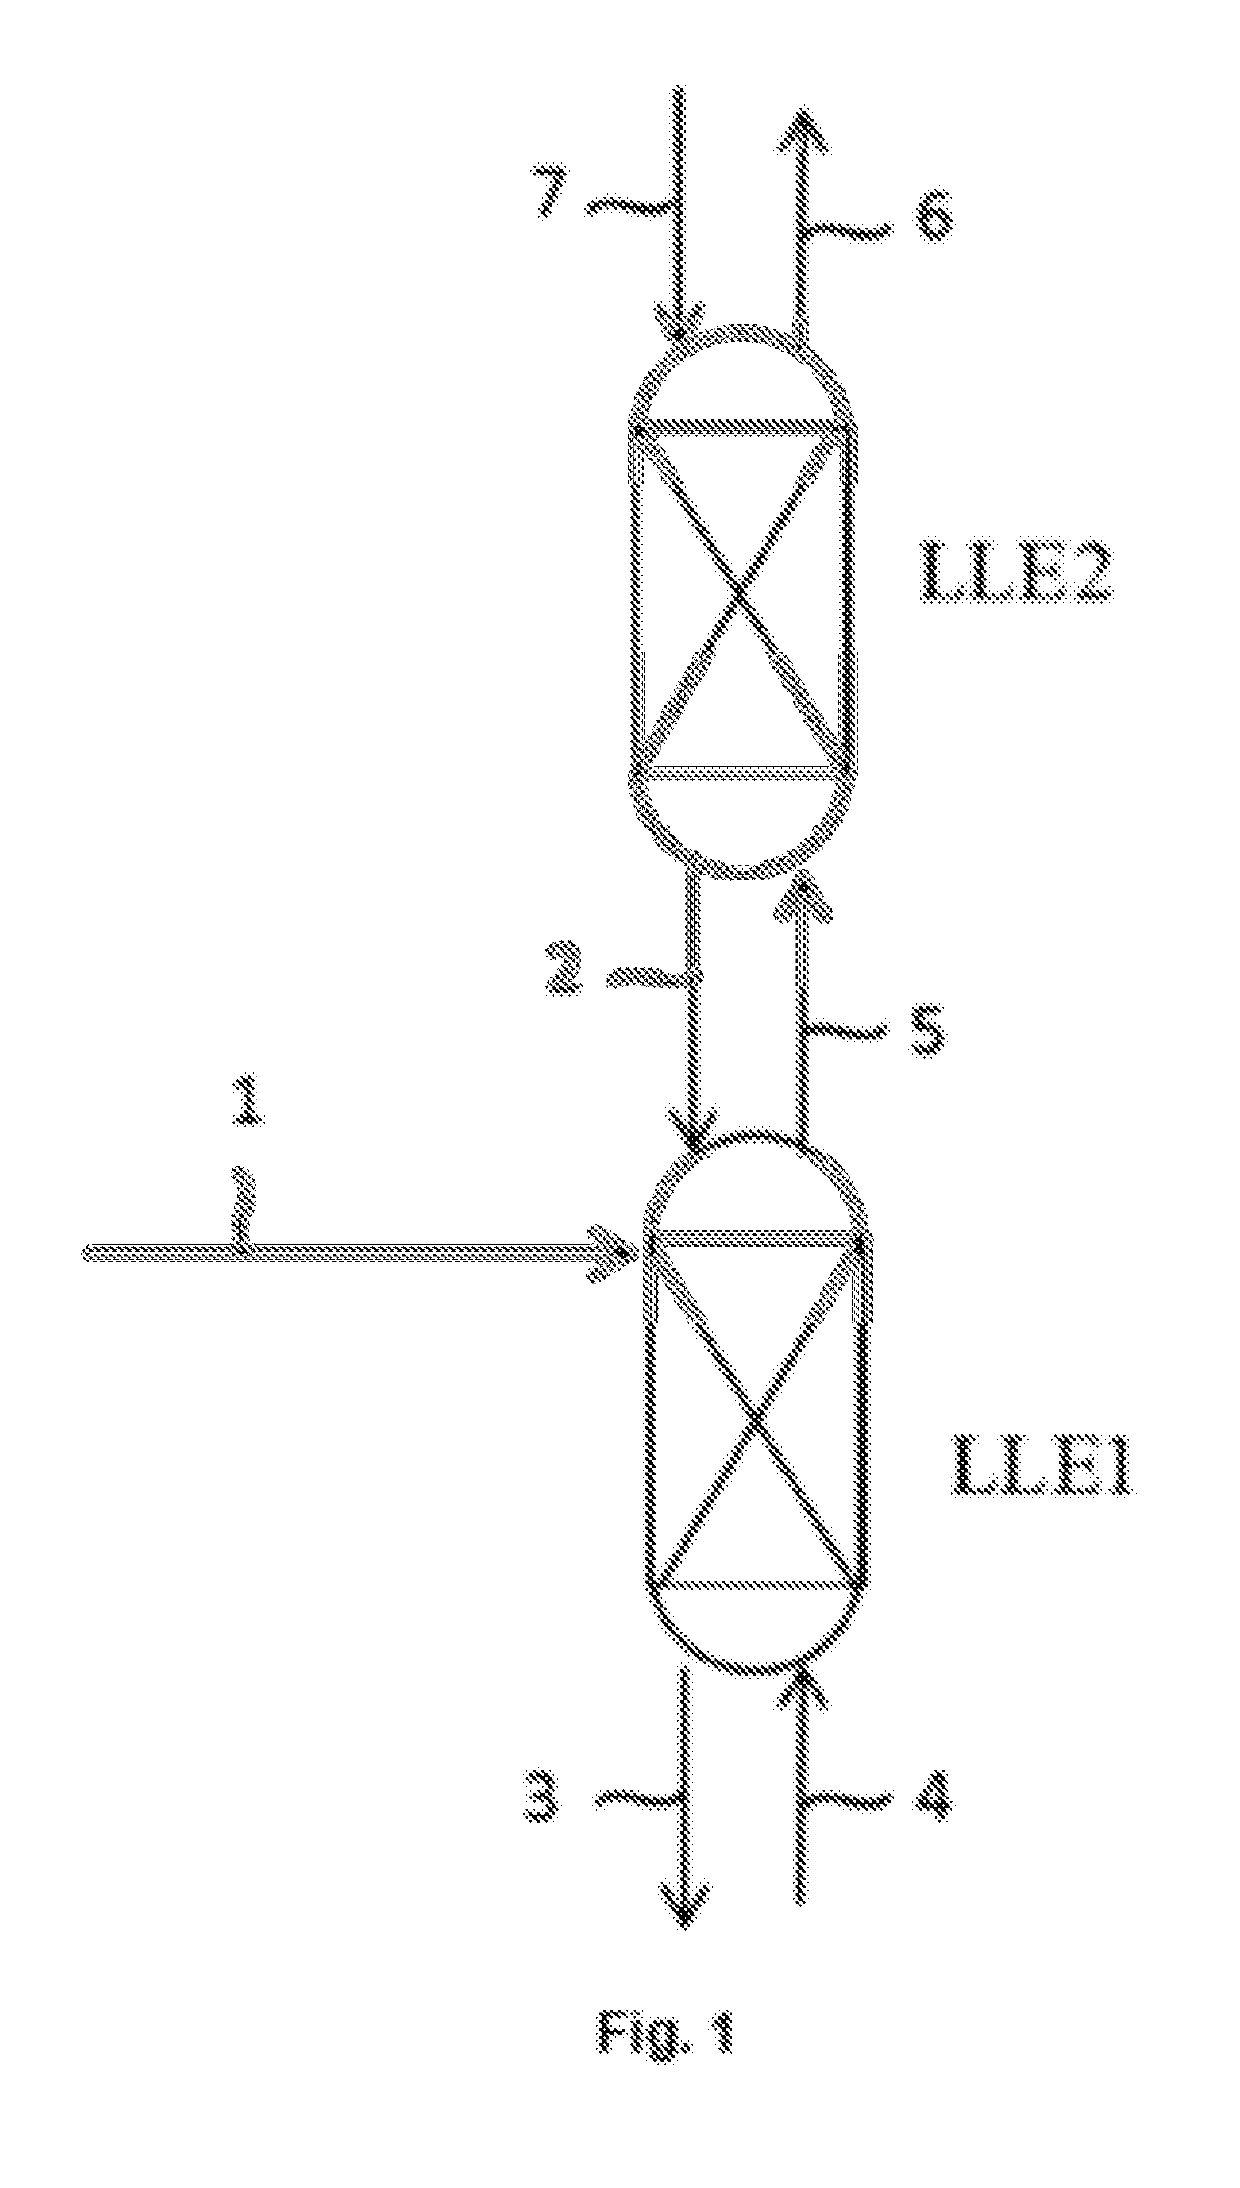 Process for purifying an aqueous solution comprising diethylacetal